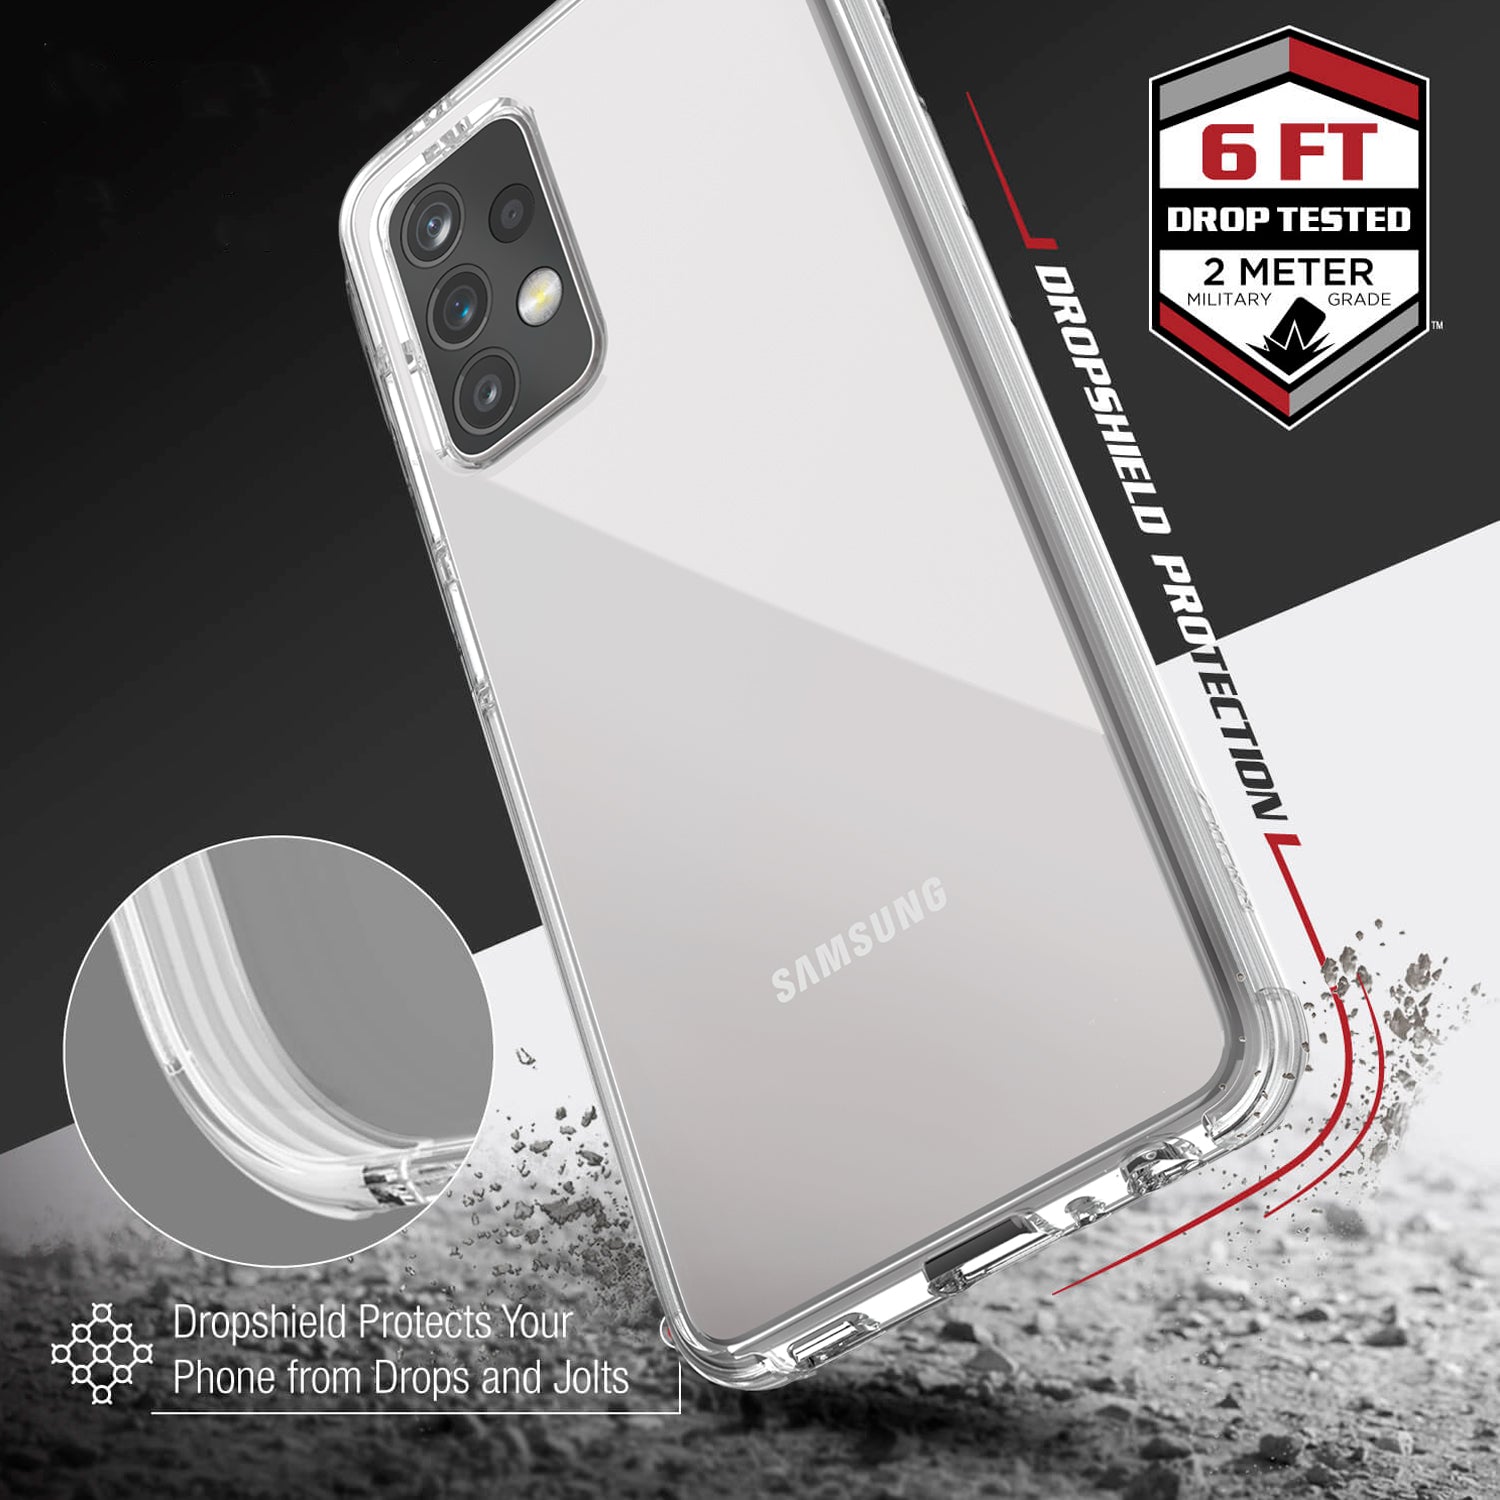 Showing the back of a Samsung Galaxy A52 in a Raptic Clear case with 2 metre drop protection